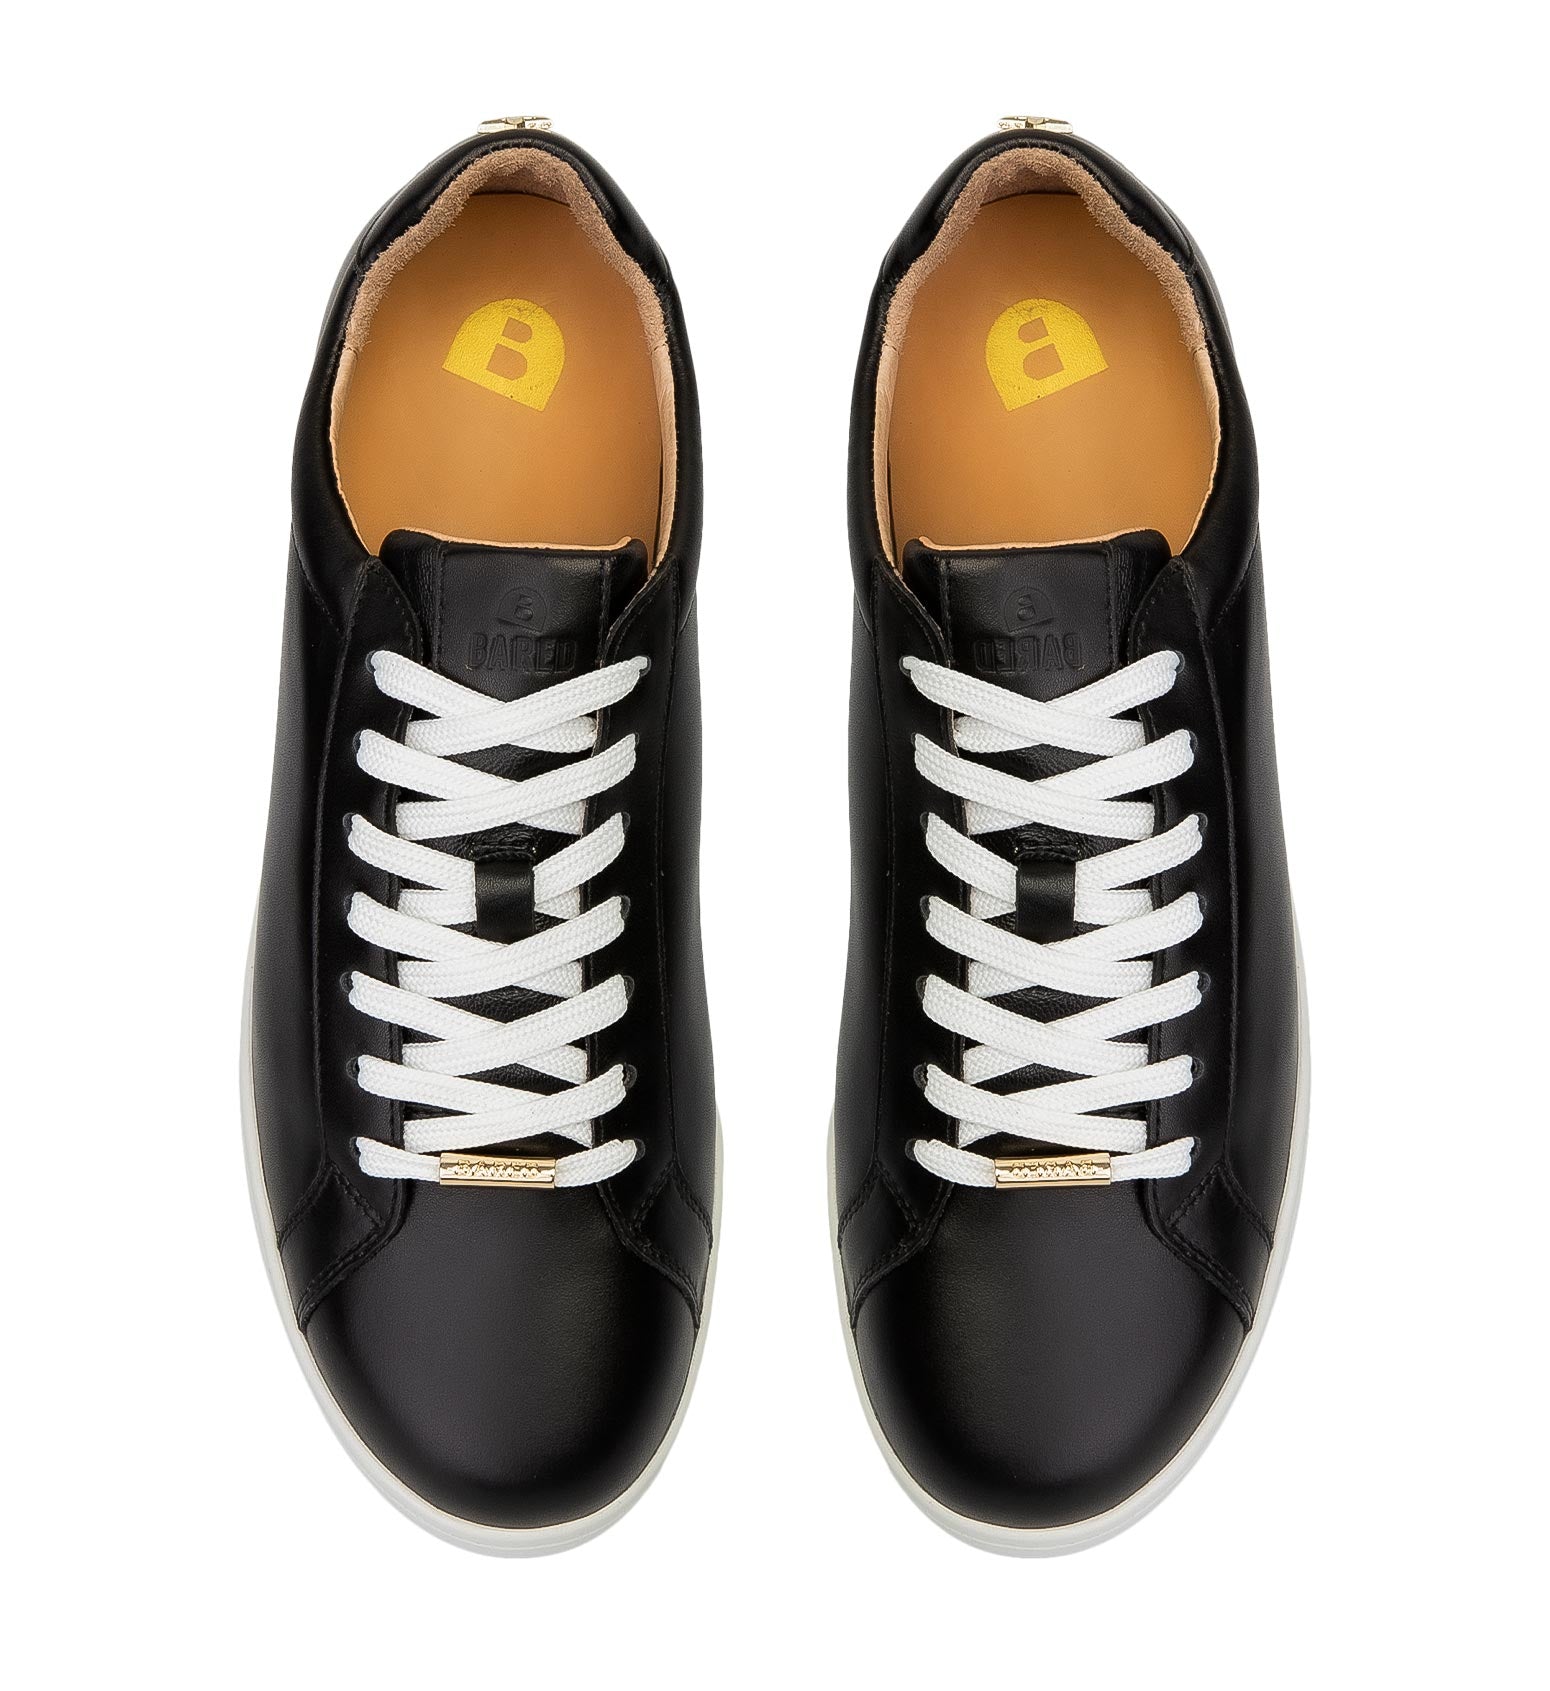 Whimbrel Black Leather & Gold Star Sneakers | Bared Footwear